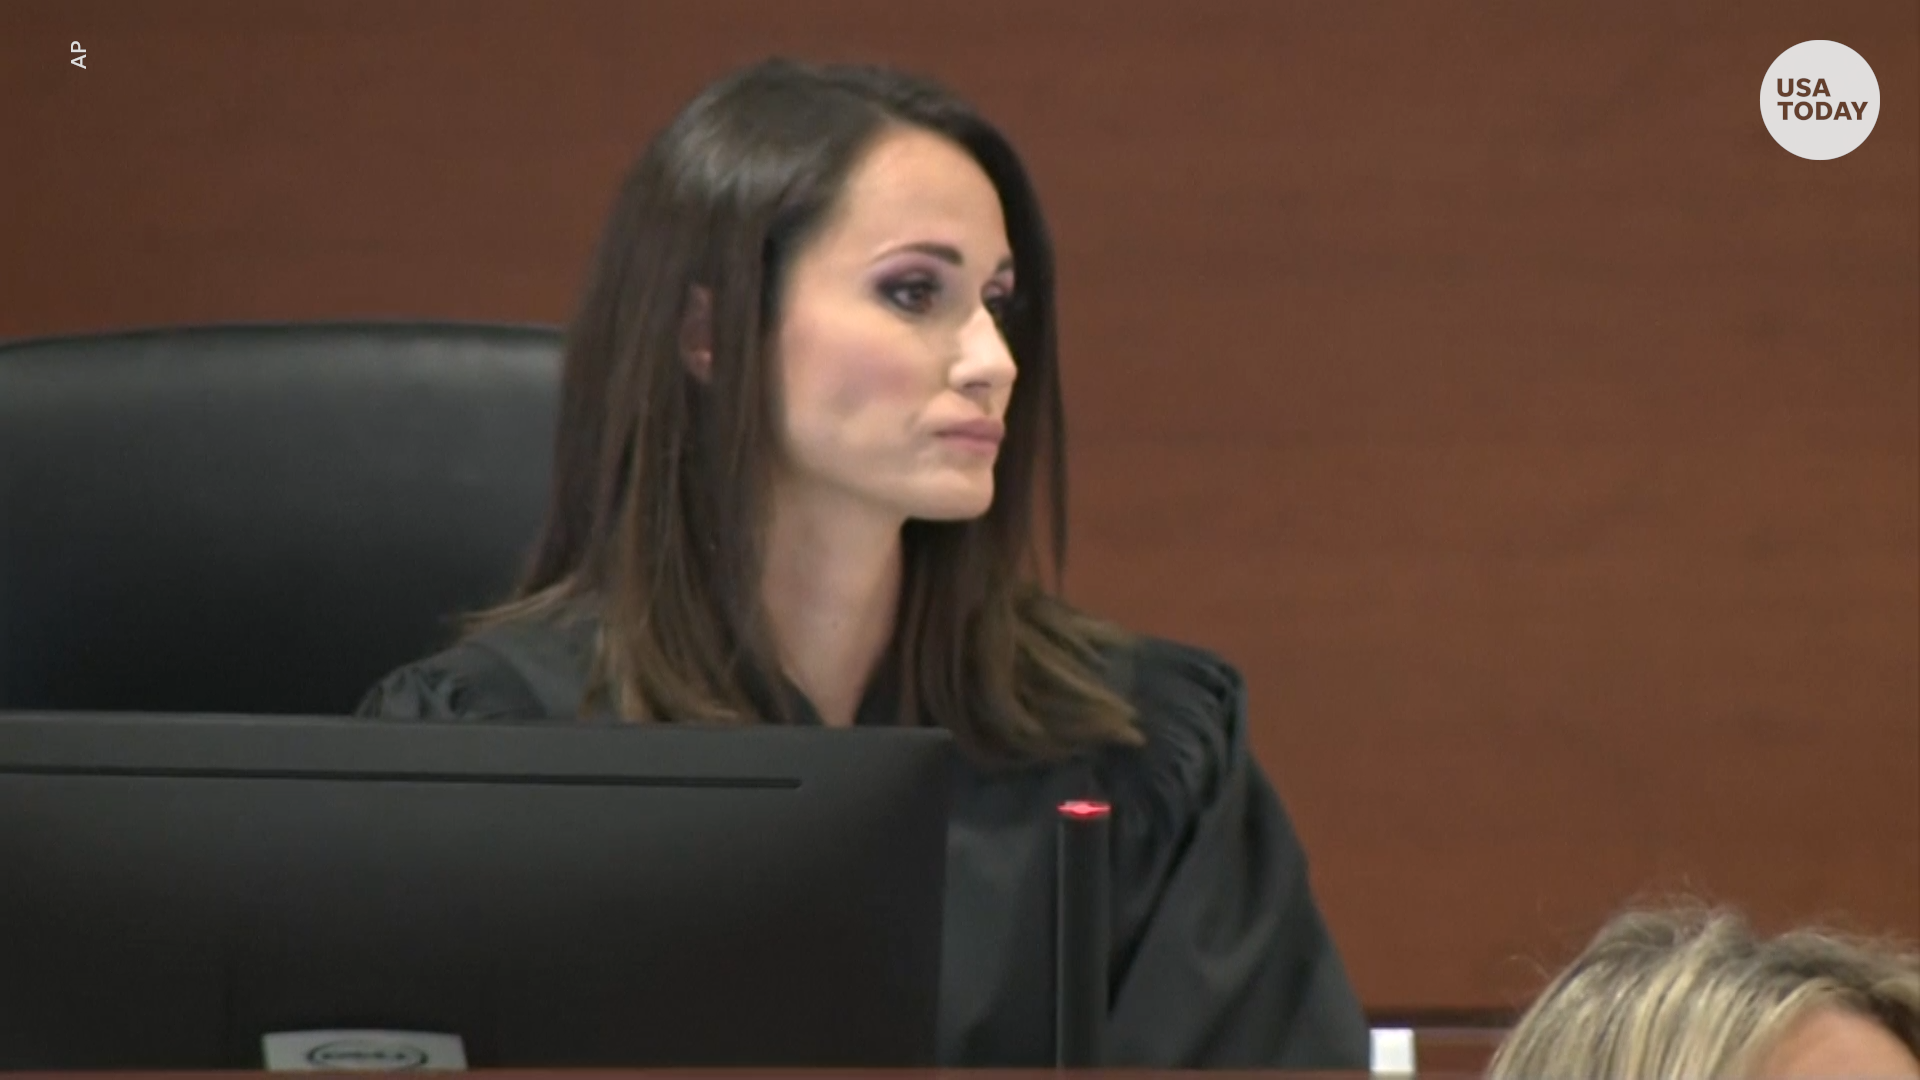 Florida judge who oversaw Parkland mass shooting trial should be reprimanded, commission says